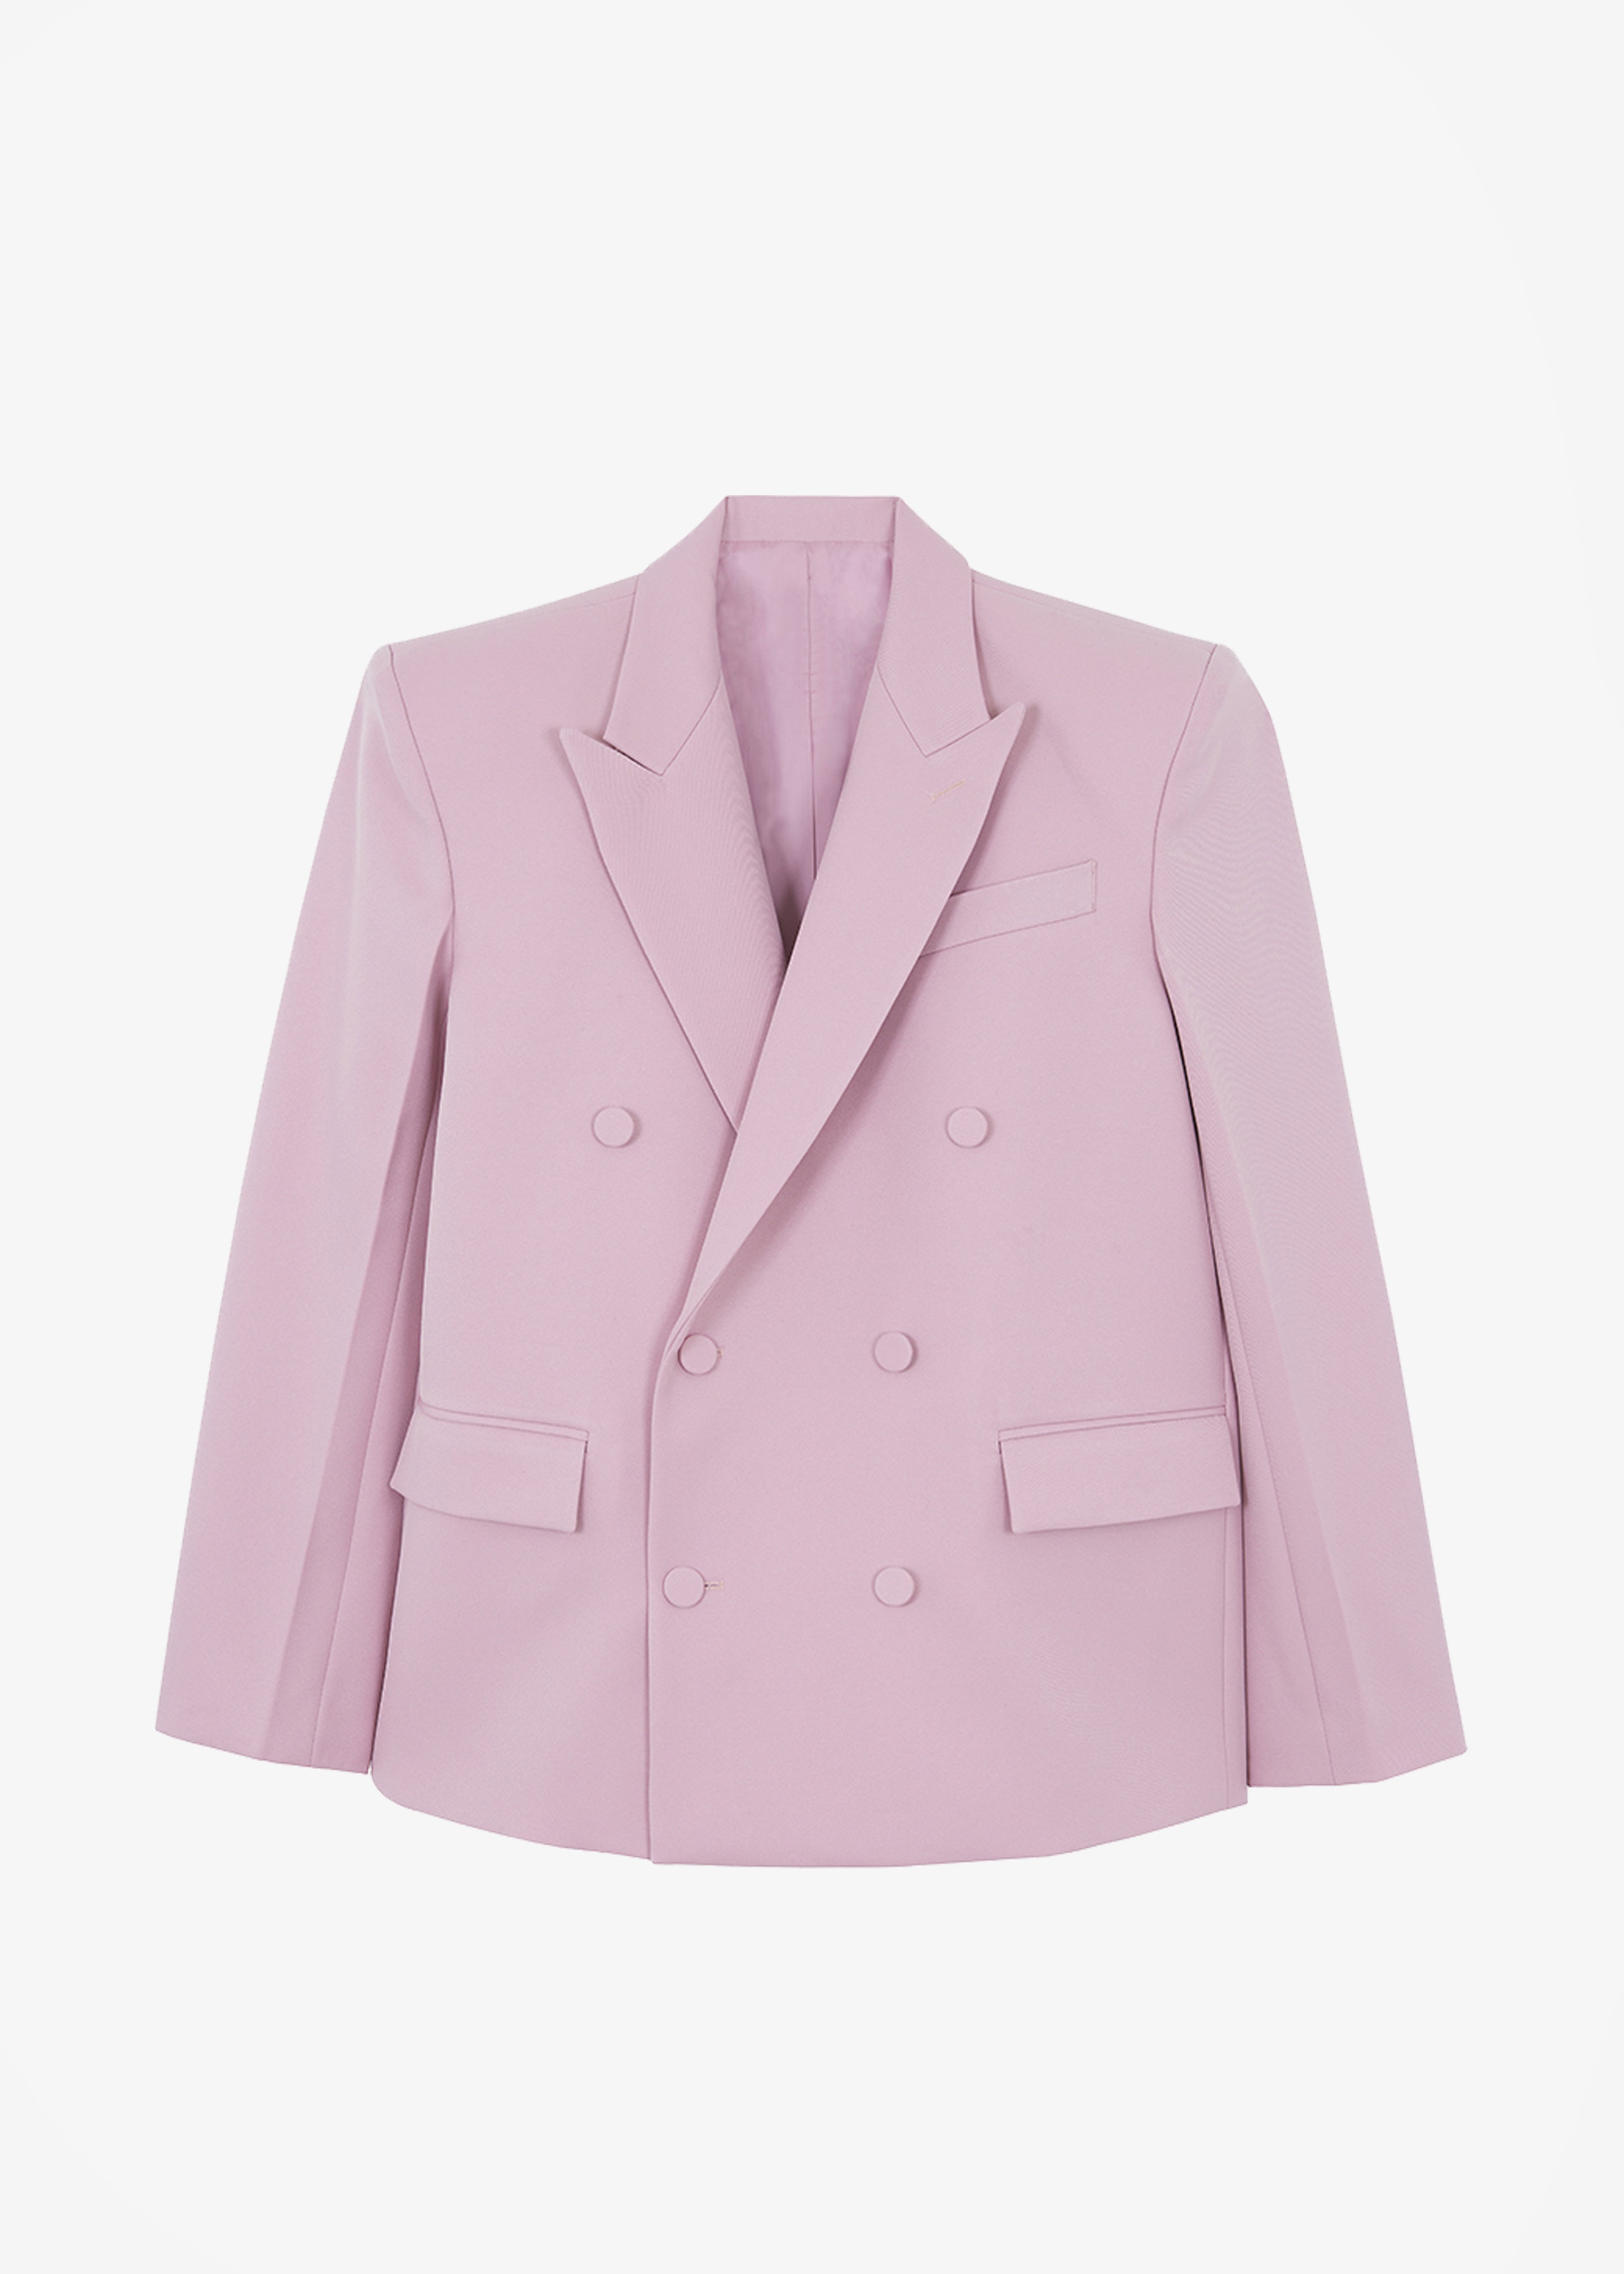 Zia Covered Buttons Blazer - Pink - 8